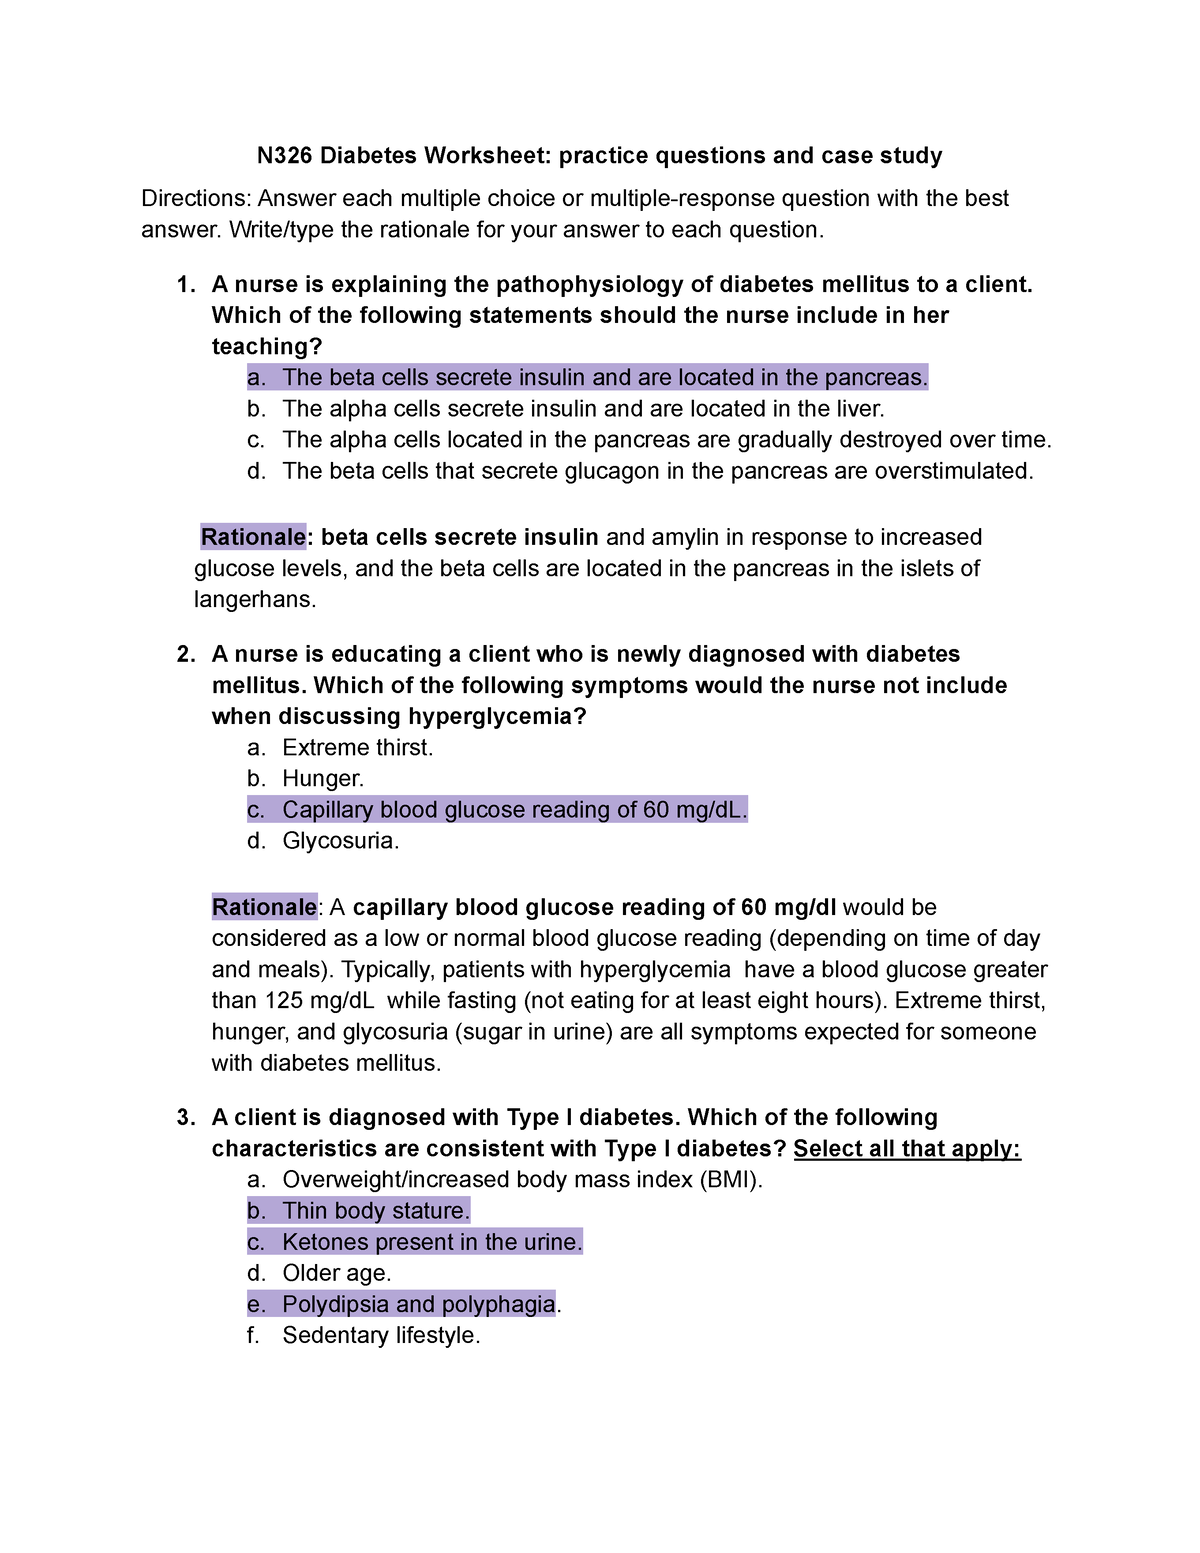 diabetes case study questions and answers pdf